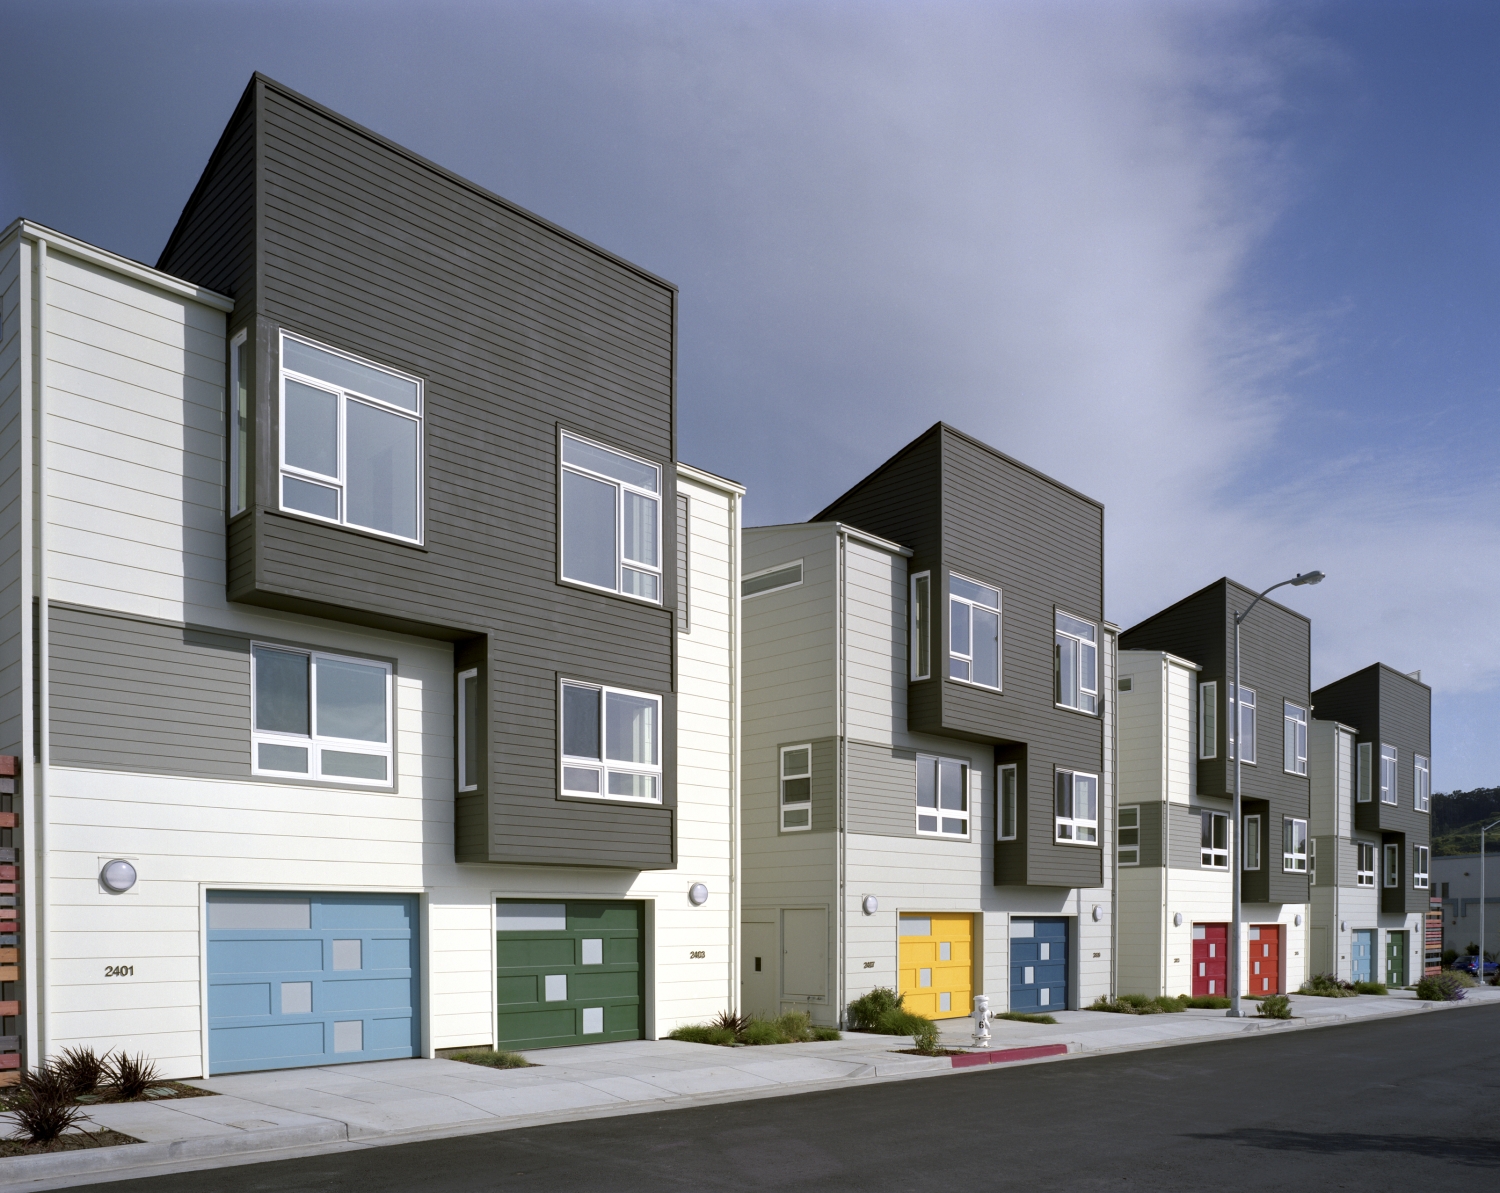 Duplex townhomes at Armstrong Place in San Francisco.